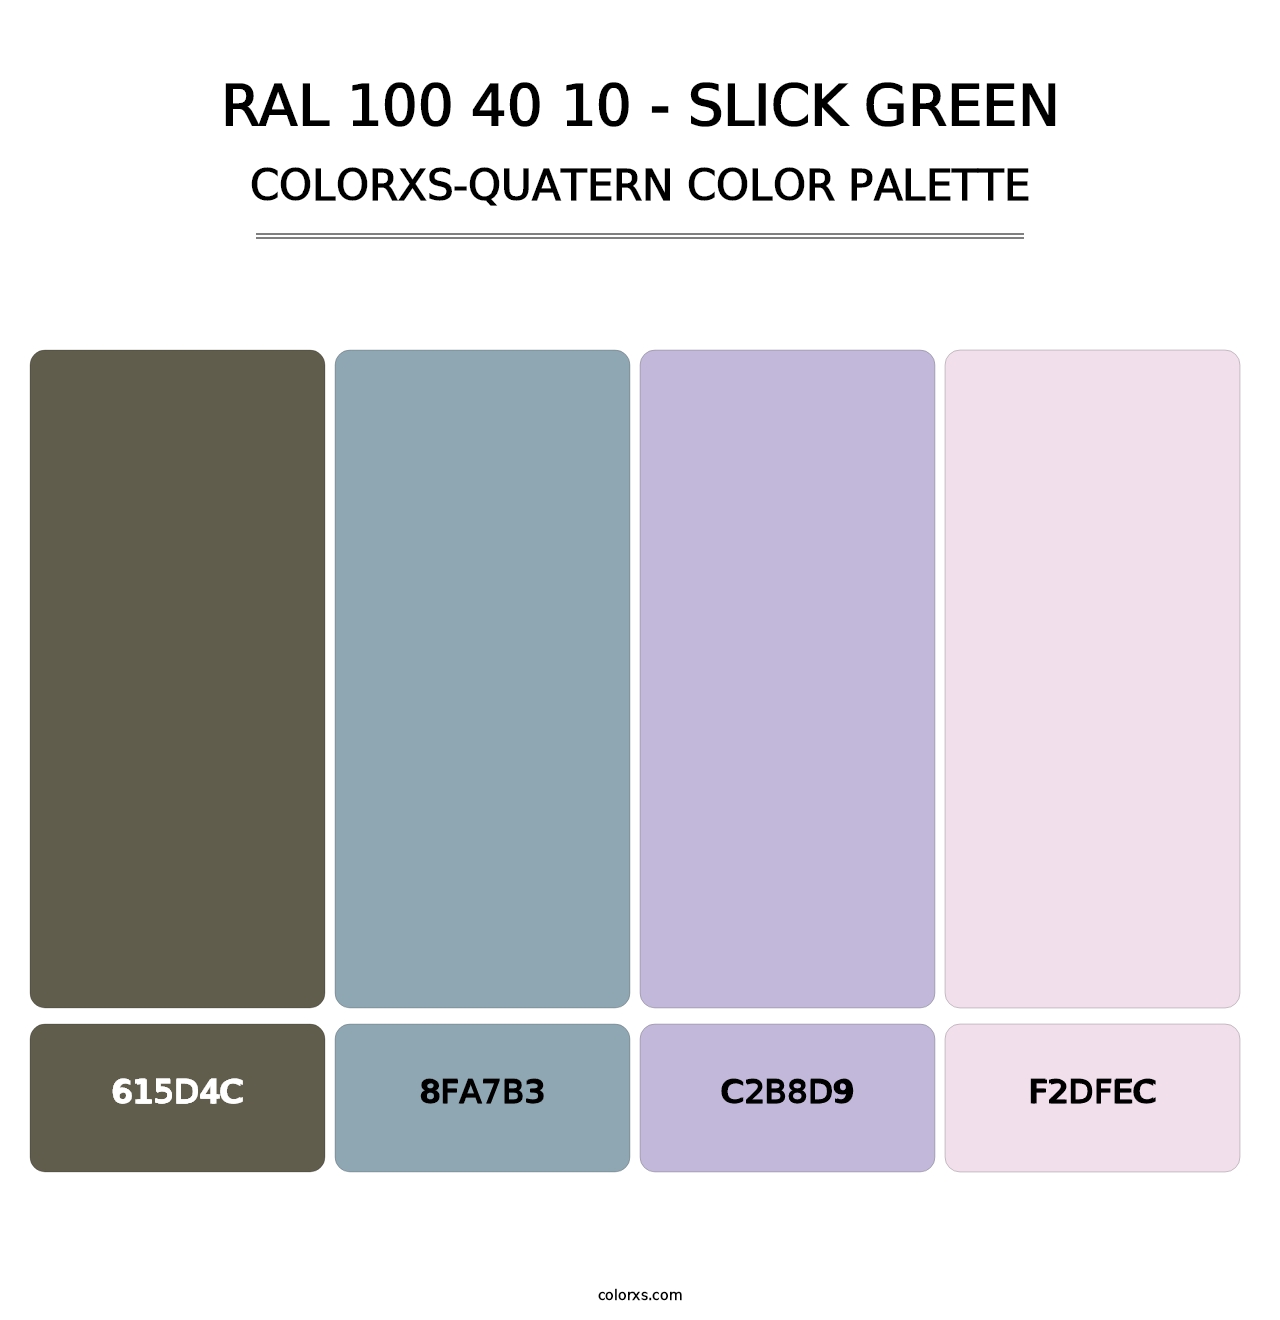 RAL 100 40 10 - Slick Green - Colorxs Quatern Palette